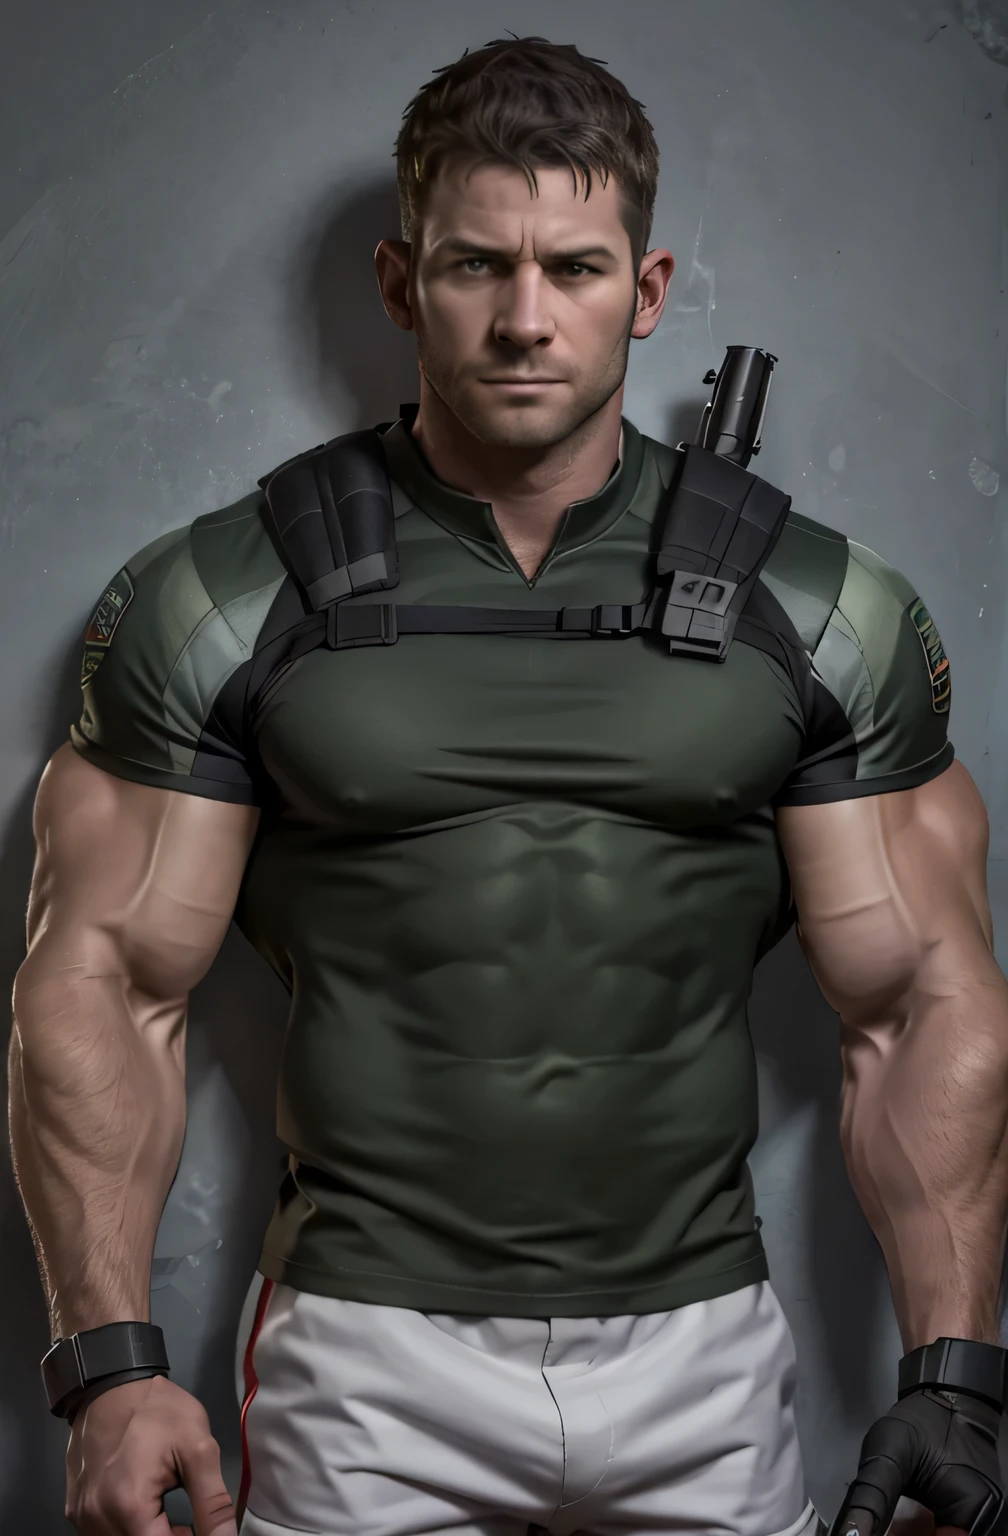 1 person, alone, 35 years old, chris redfield, Wearing a green T-shirt, serious face, looking at camera, Shoulder White，bsaa logo on shoulder, military tactics, equipment, (2 hands holding a pistol), tall and strong, biceps, abdominal muscles, Chest, best quality, masterpiece, High resolution:1.2, upper body shot, Pitch-black corridors，No background